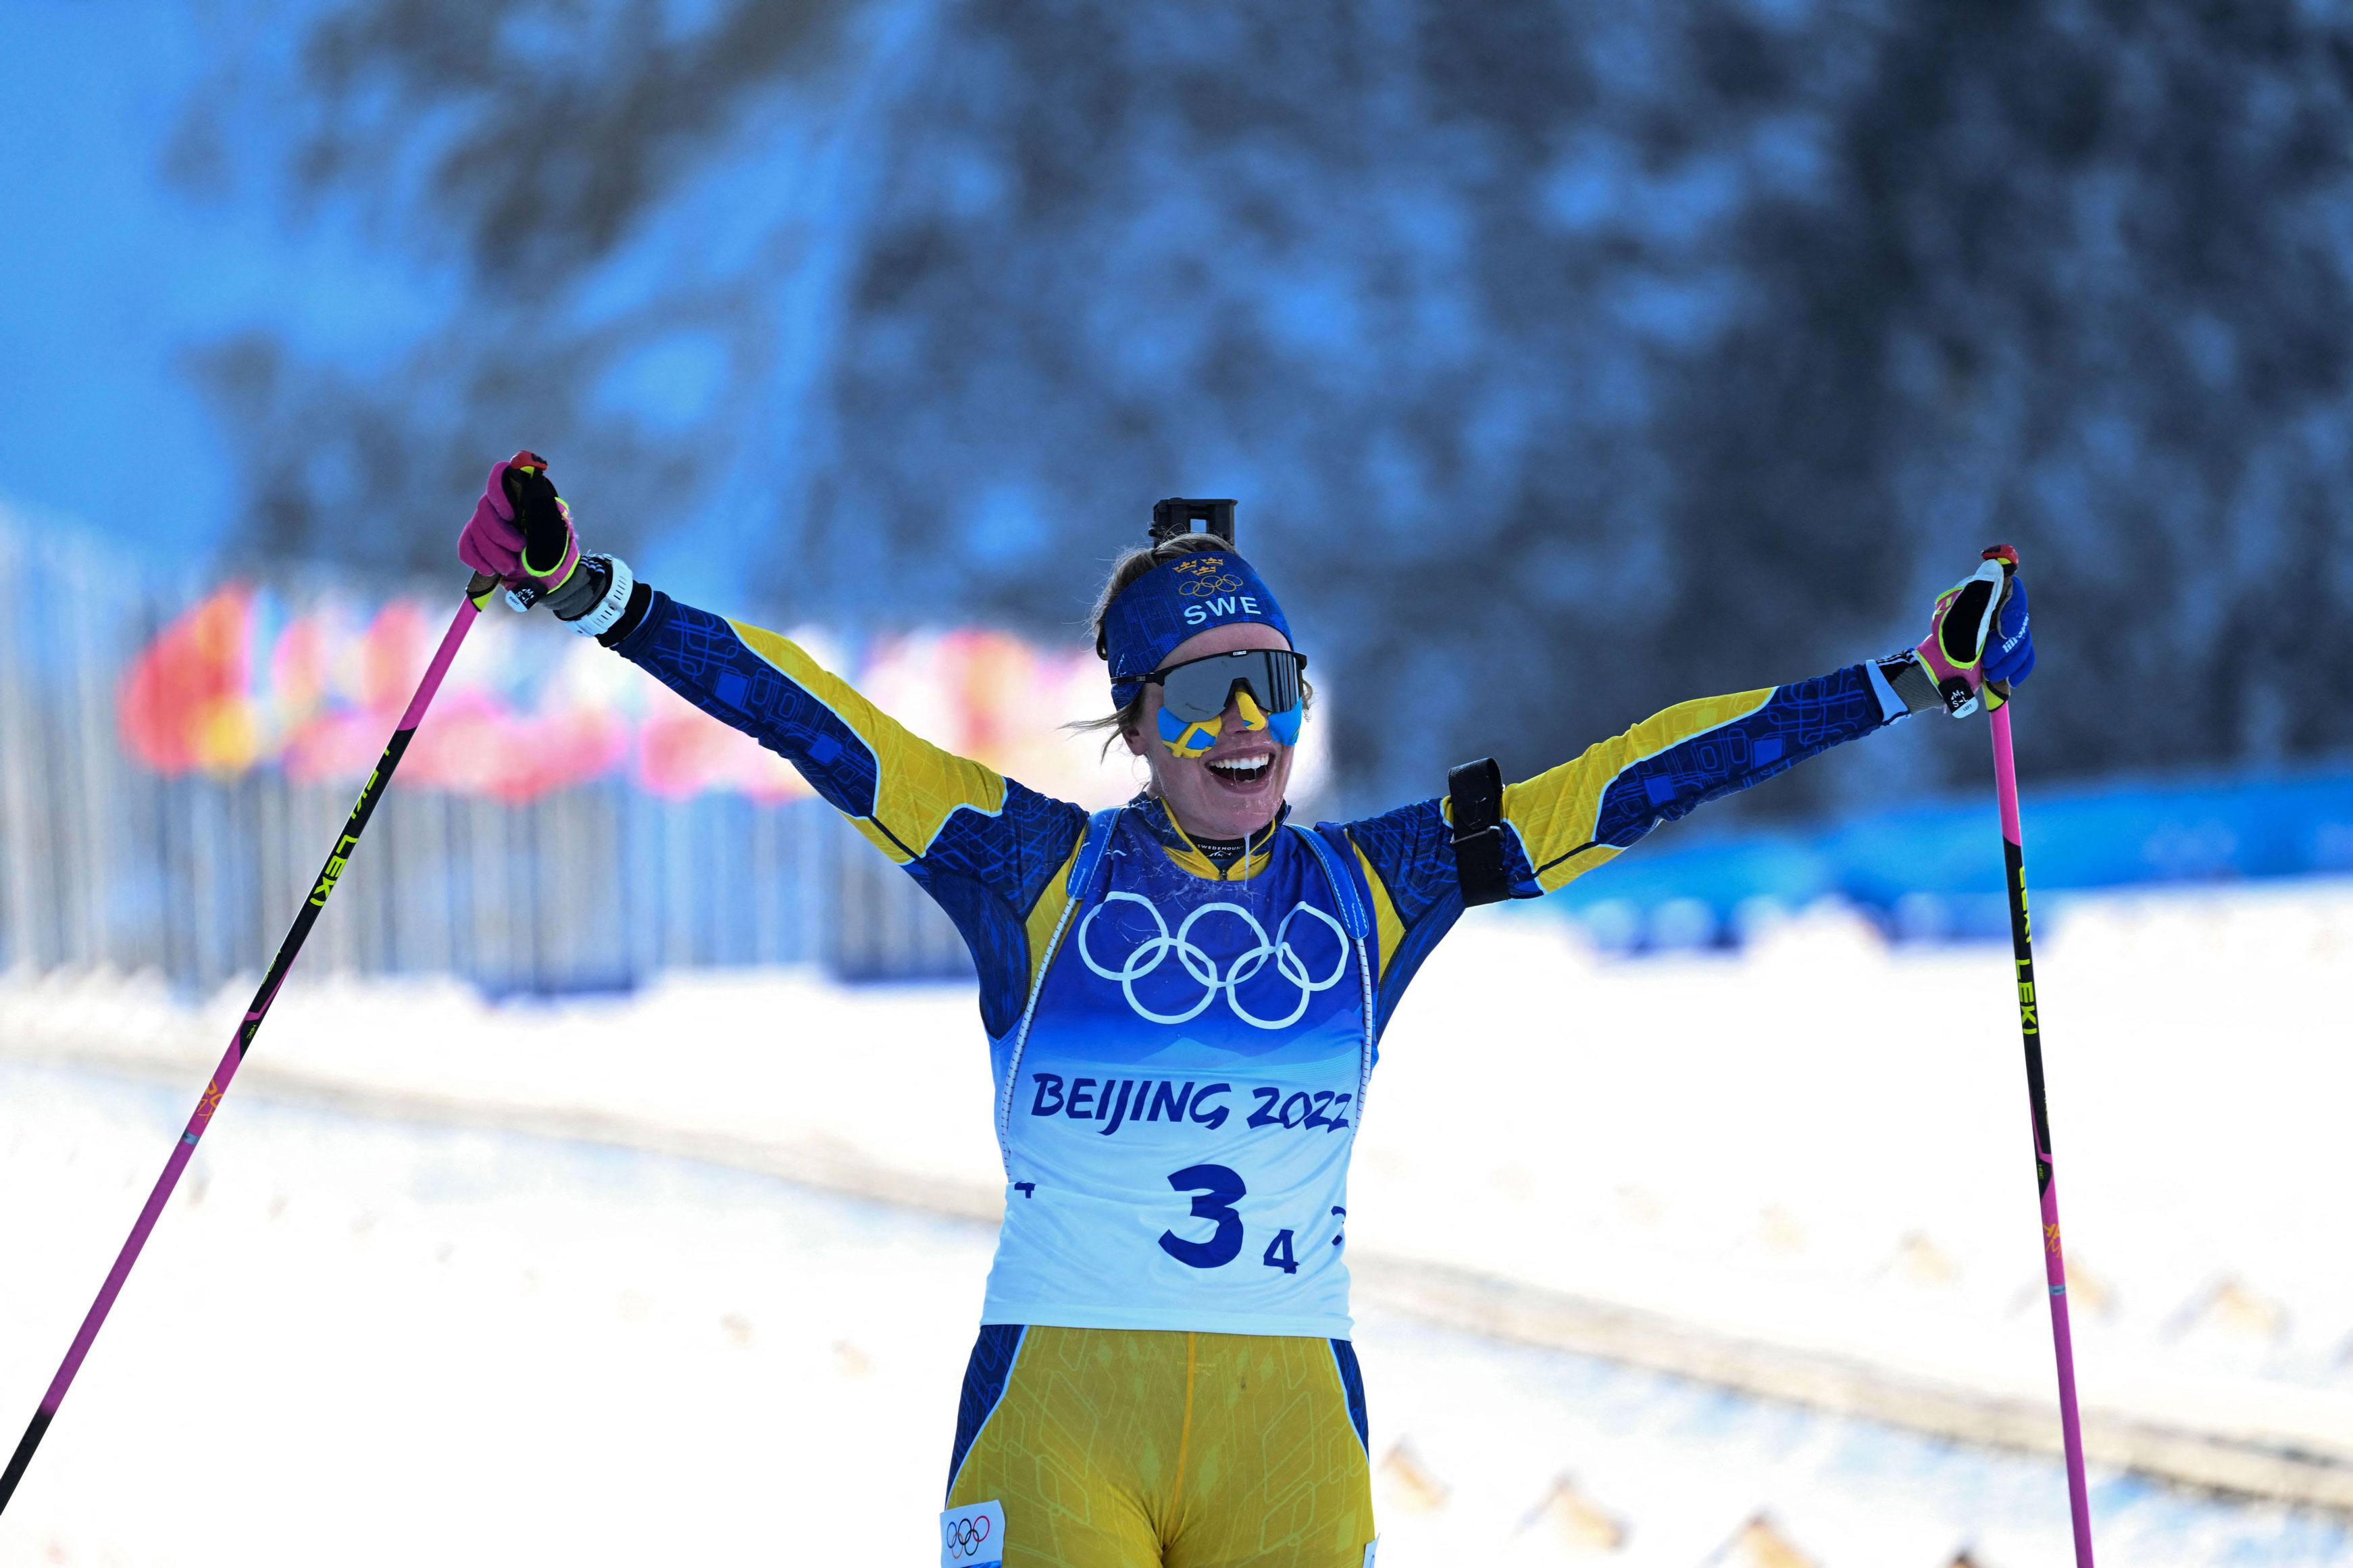 Sweden's Elvira Oberg celebrates a she crosses the finish line to win the biathlon women's 4x6km relay event, on Wednesday.